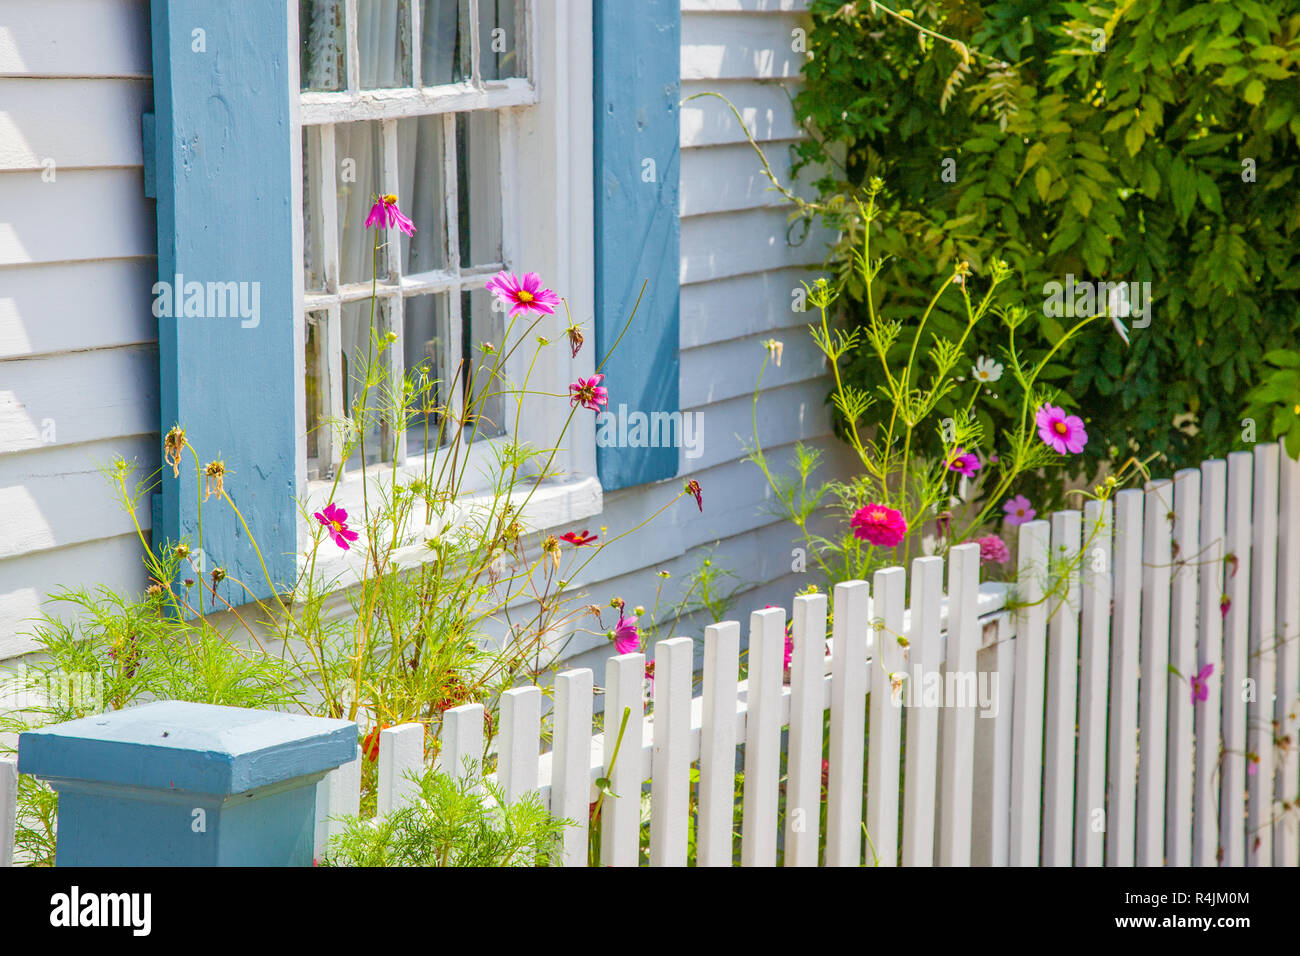 Flowers and a white picket fence in Rockport, MA Stock Photo